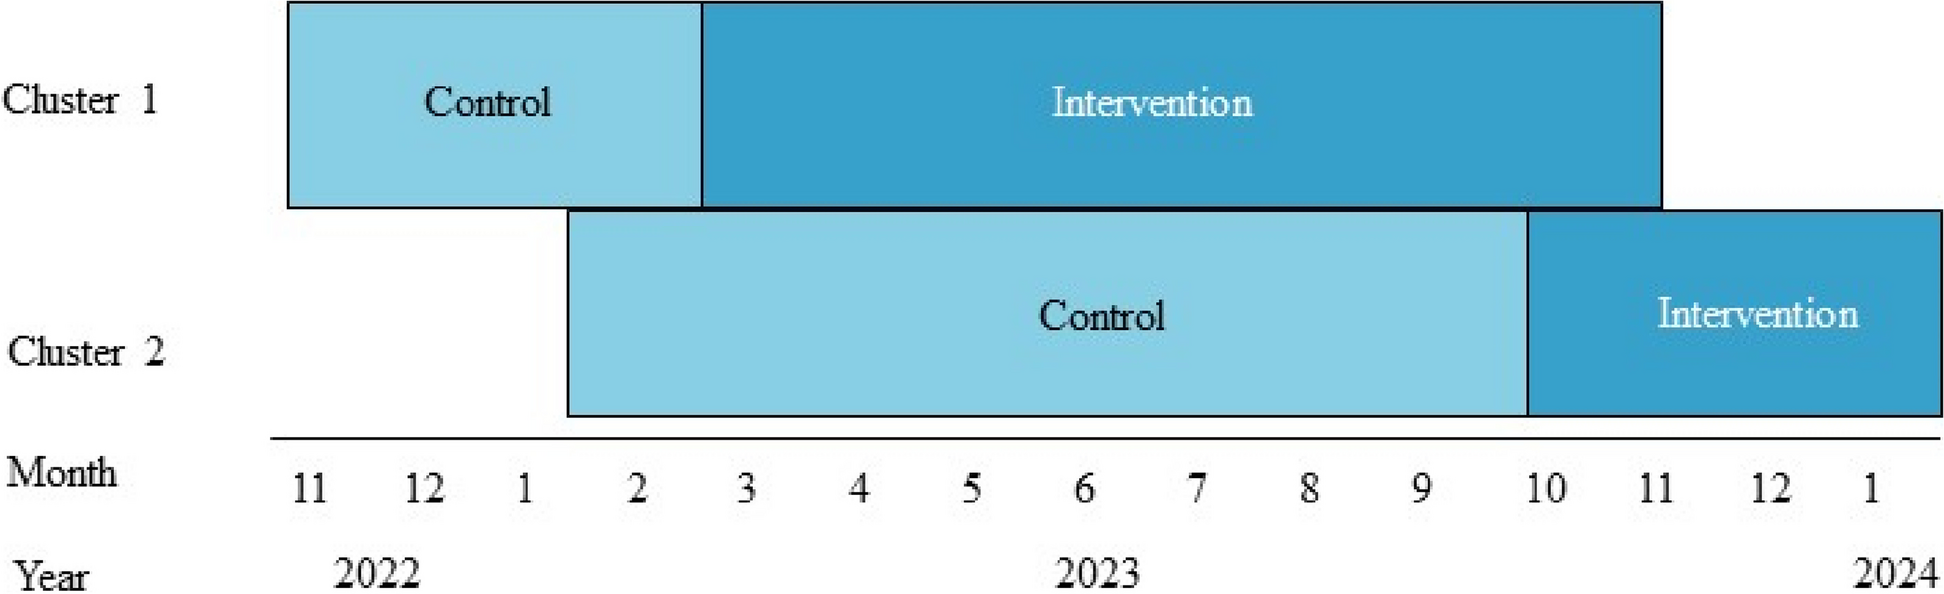 Improving mental health in chronic care in general practice: study protocol for a cluster-randomised controlled trial of the Healthy Mind intervention